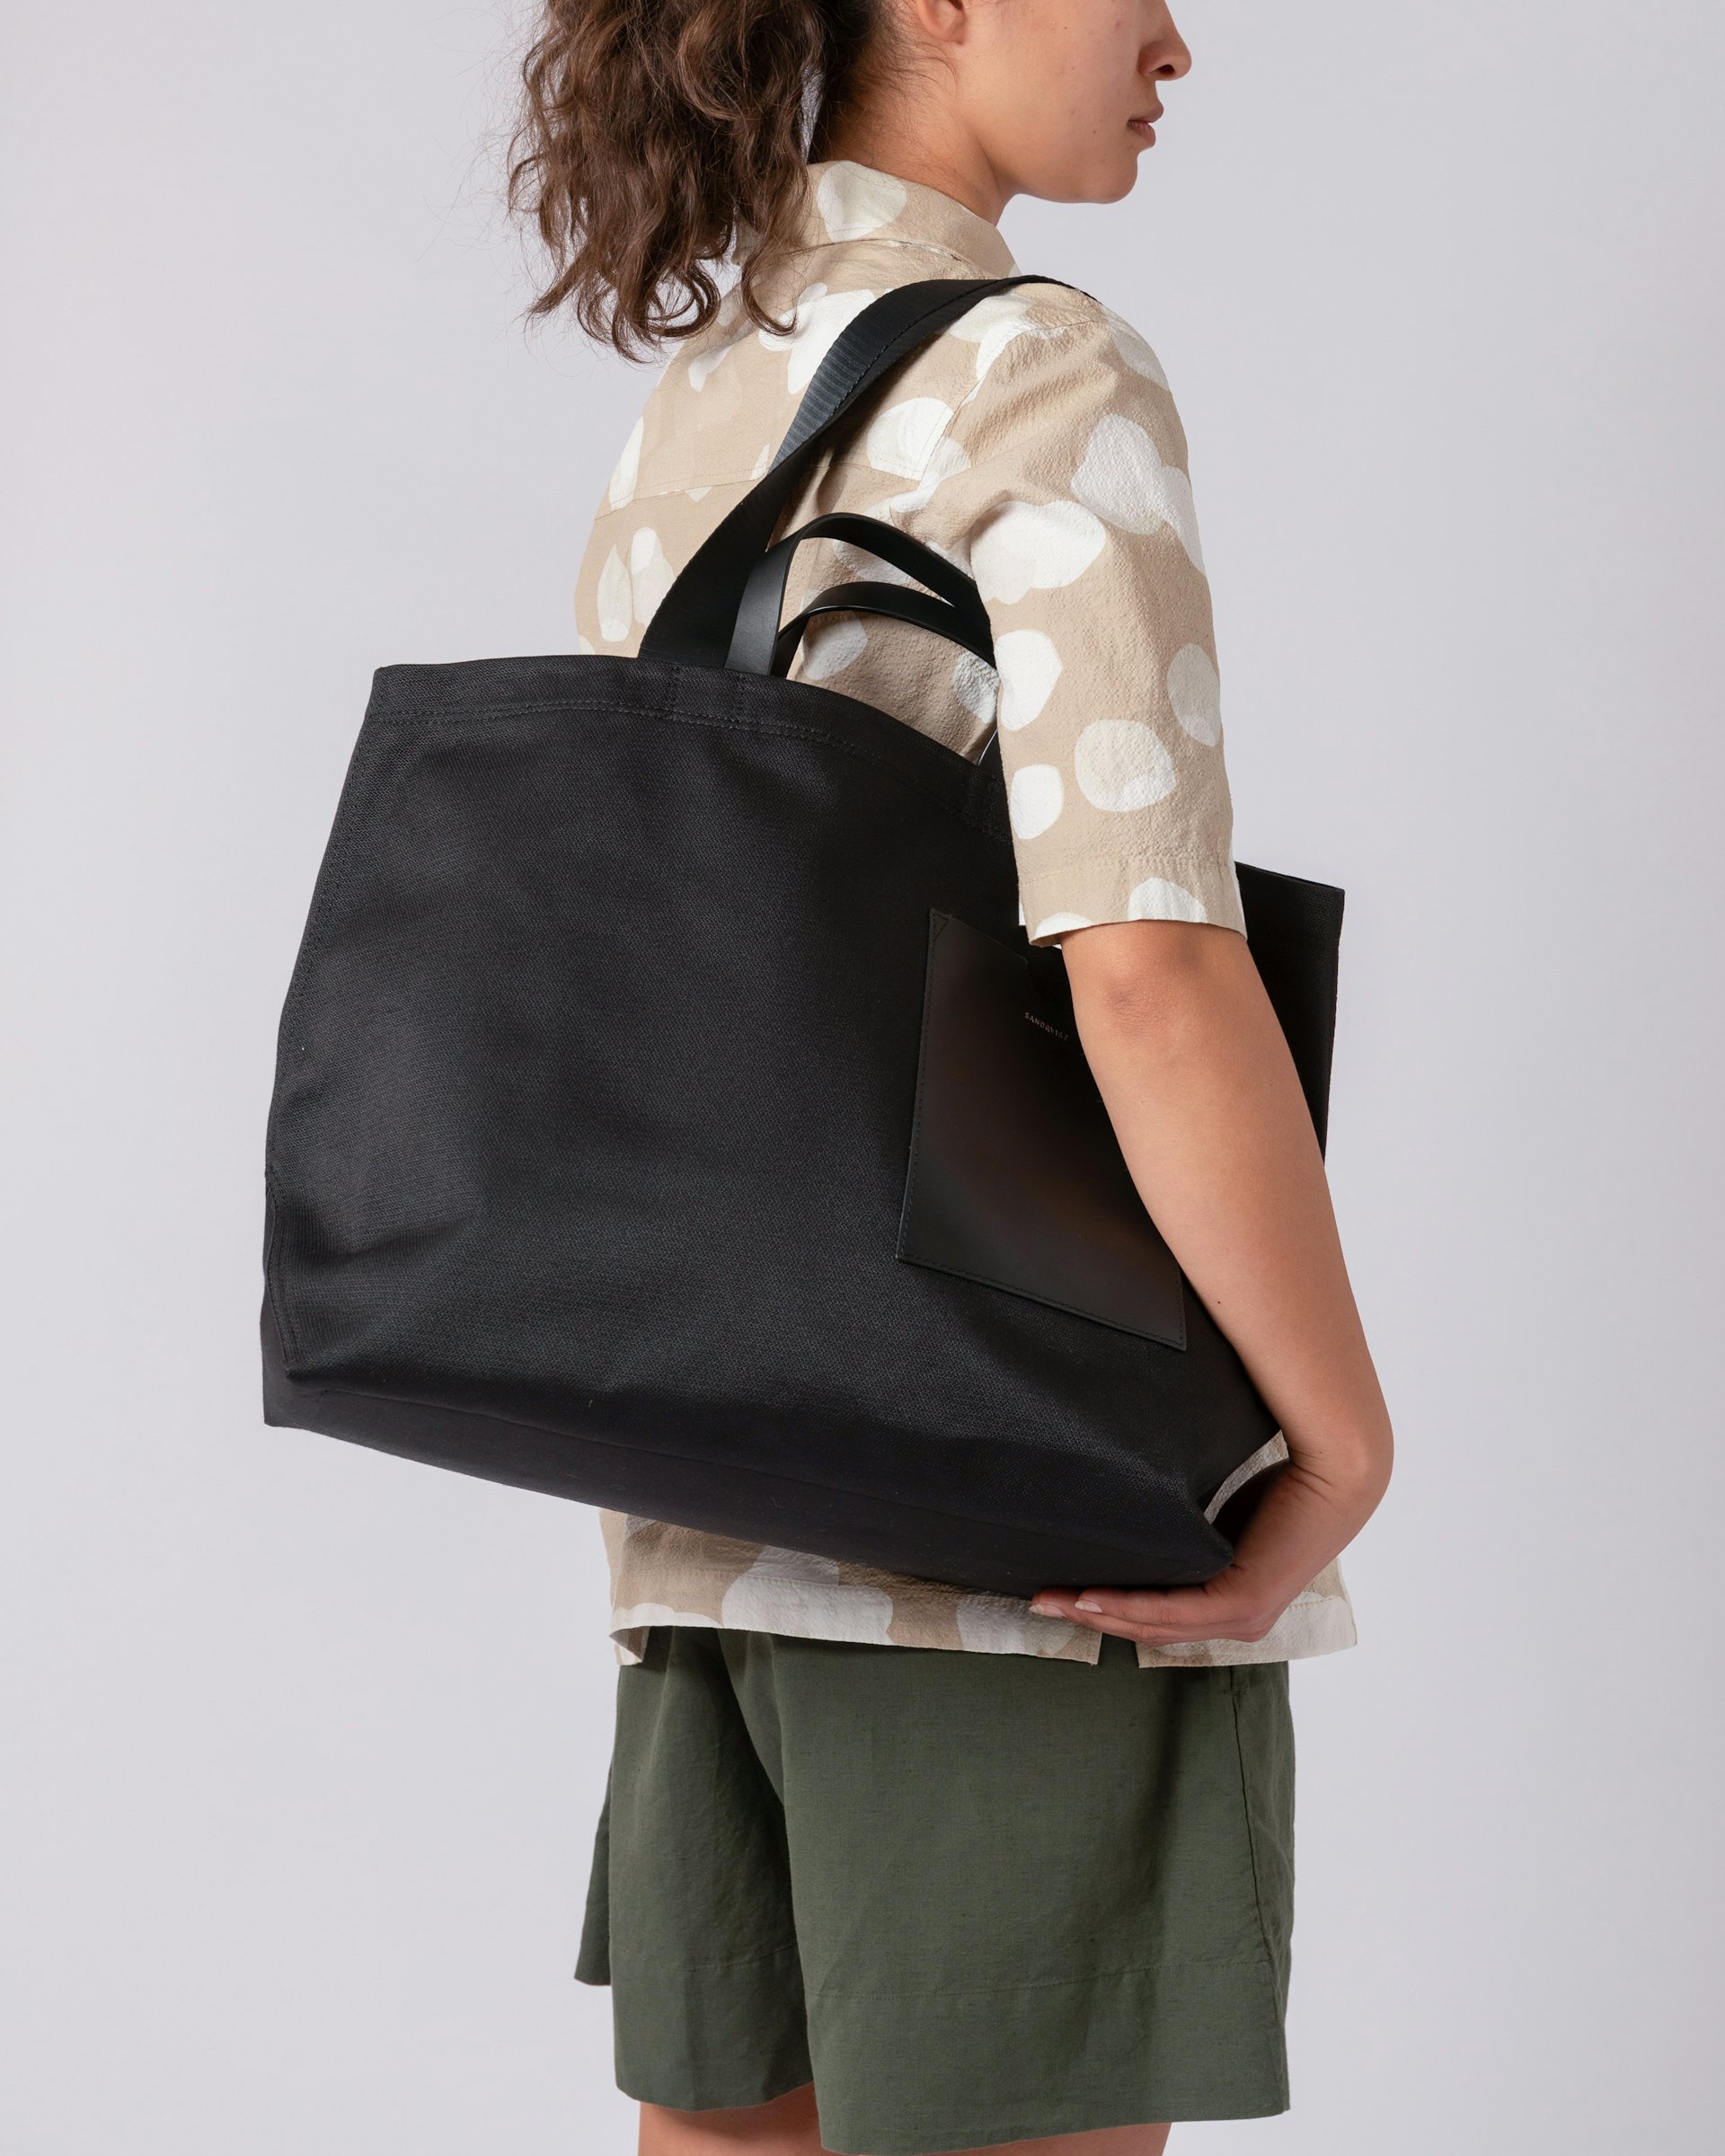 Agnes belongs to the category Tote bags and is in color black (7 of 7)